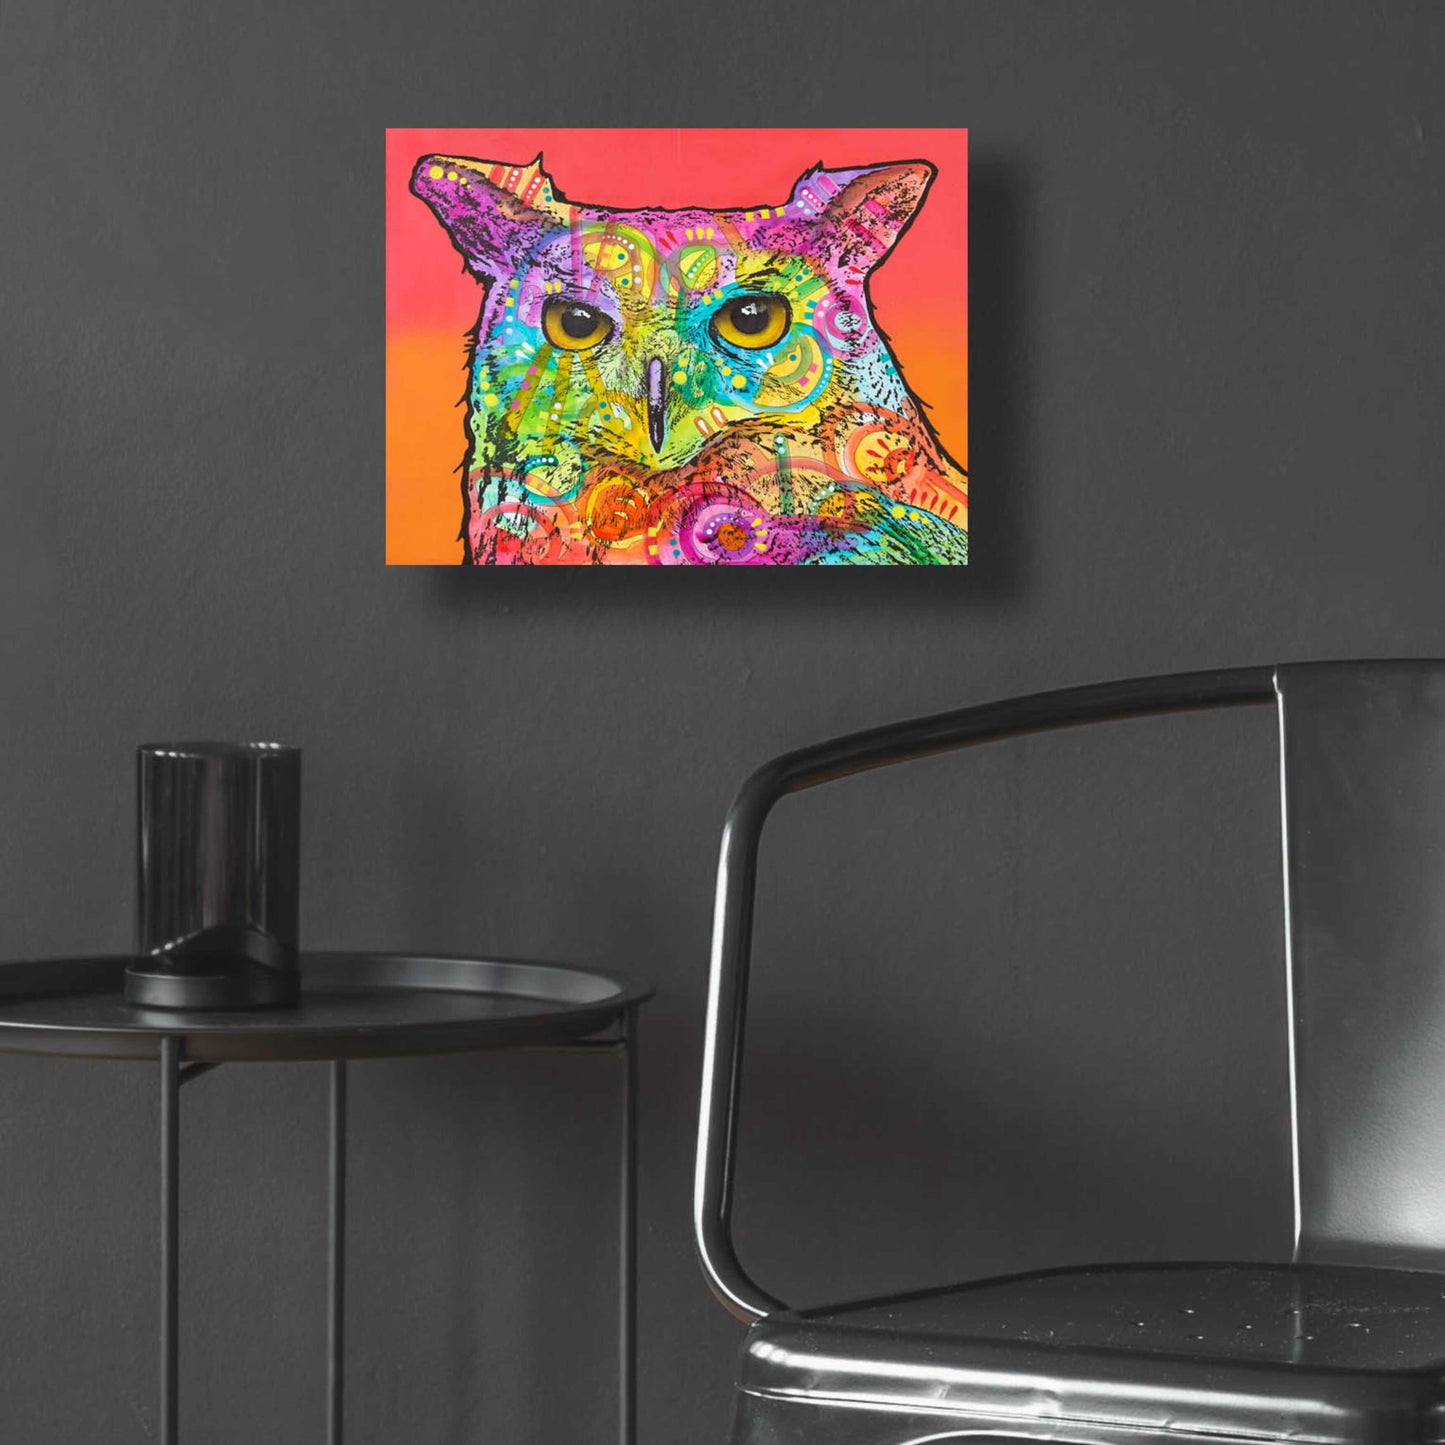 Epic Art 'Red Owl' by Dean Russo, Acrylic Glass Wall Art,16x12